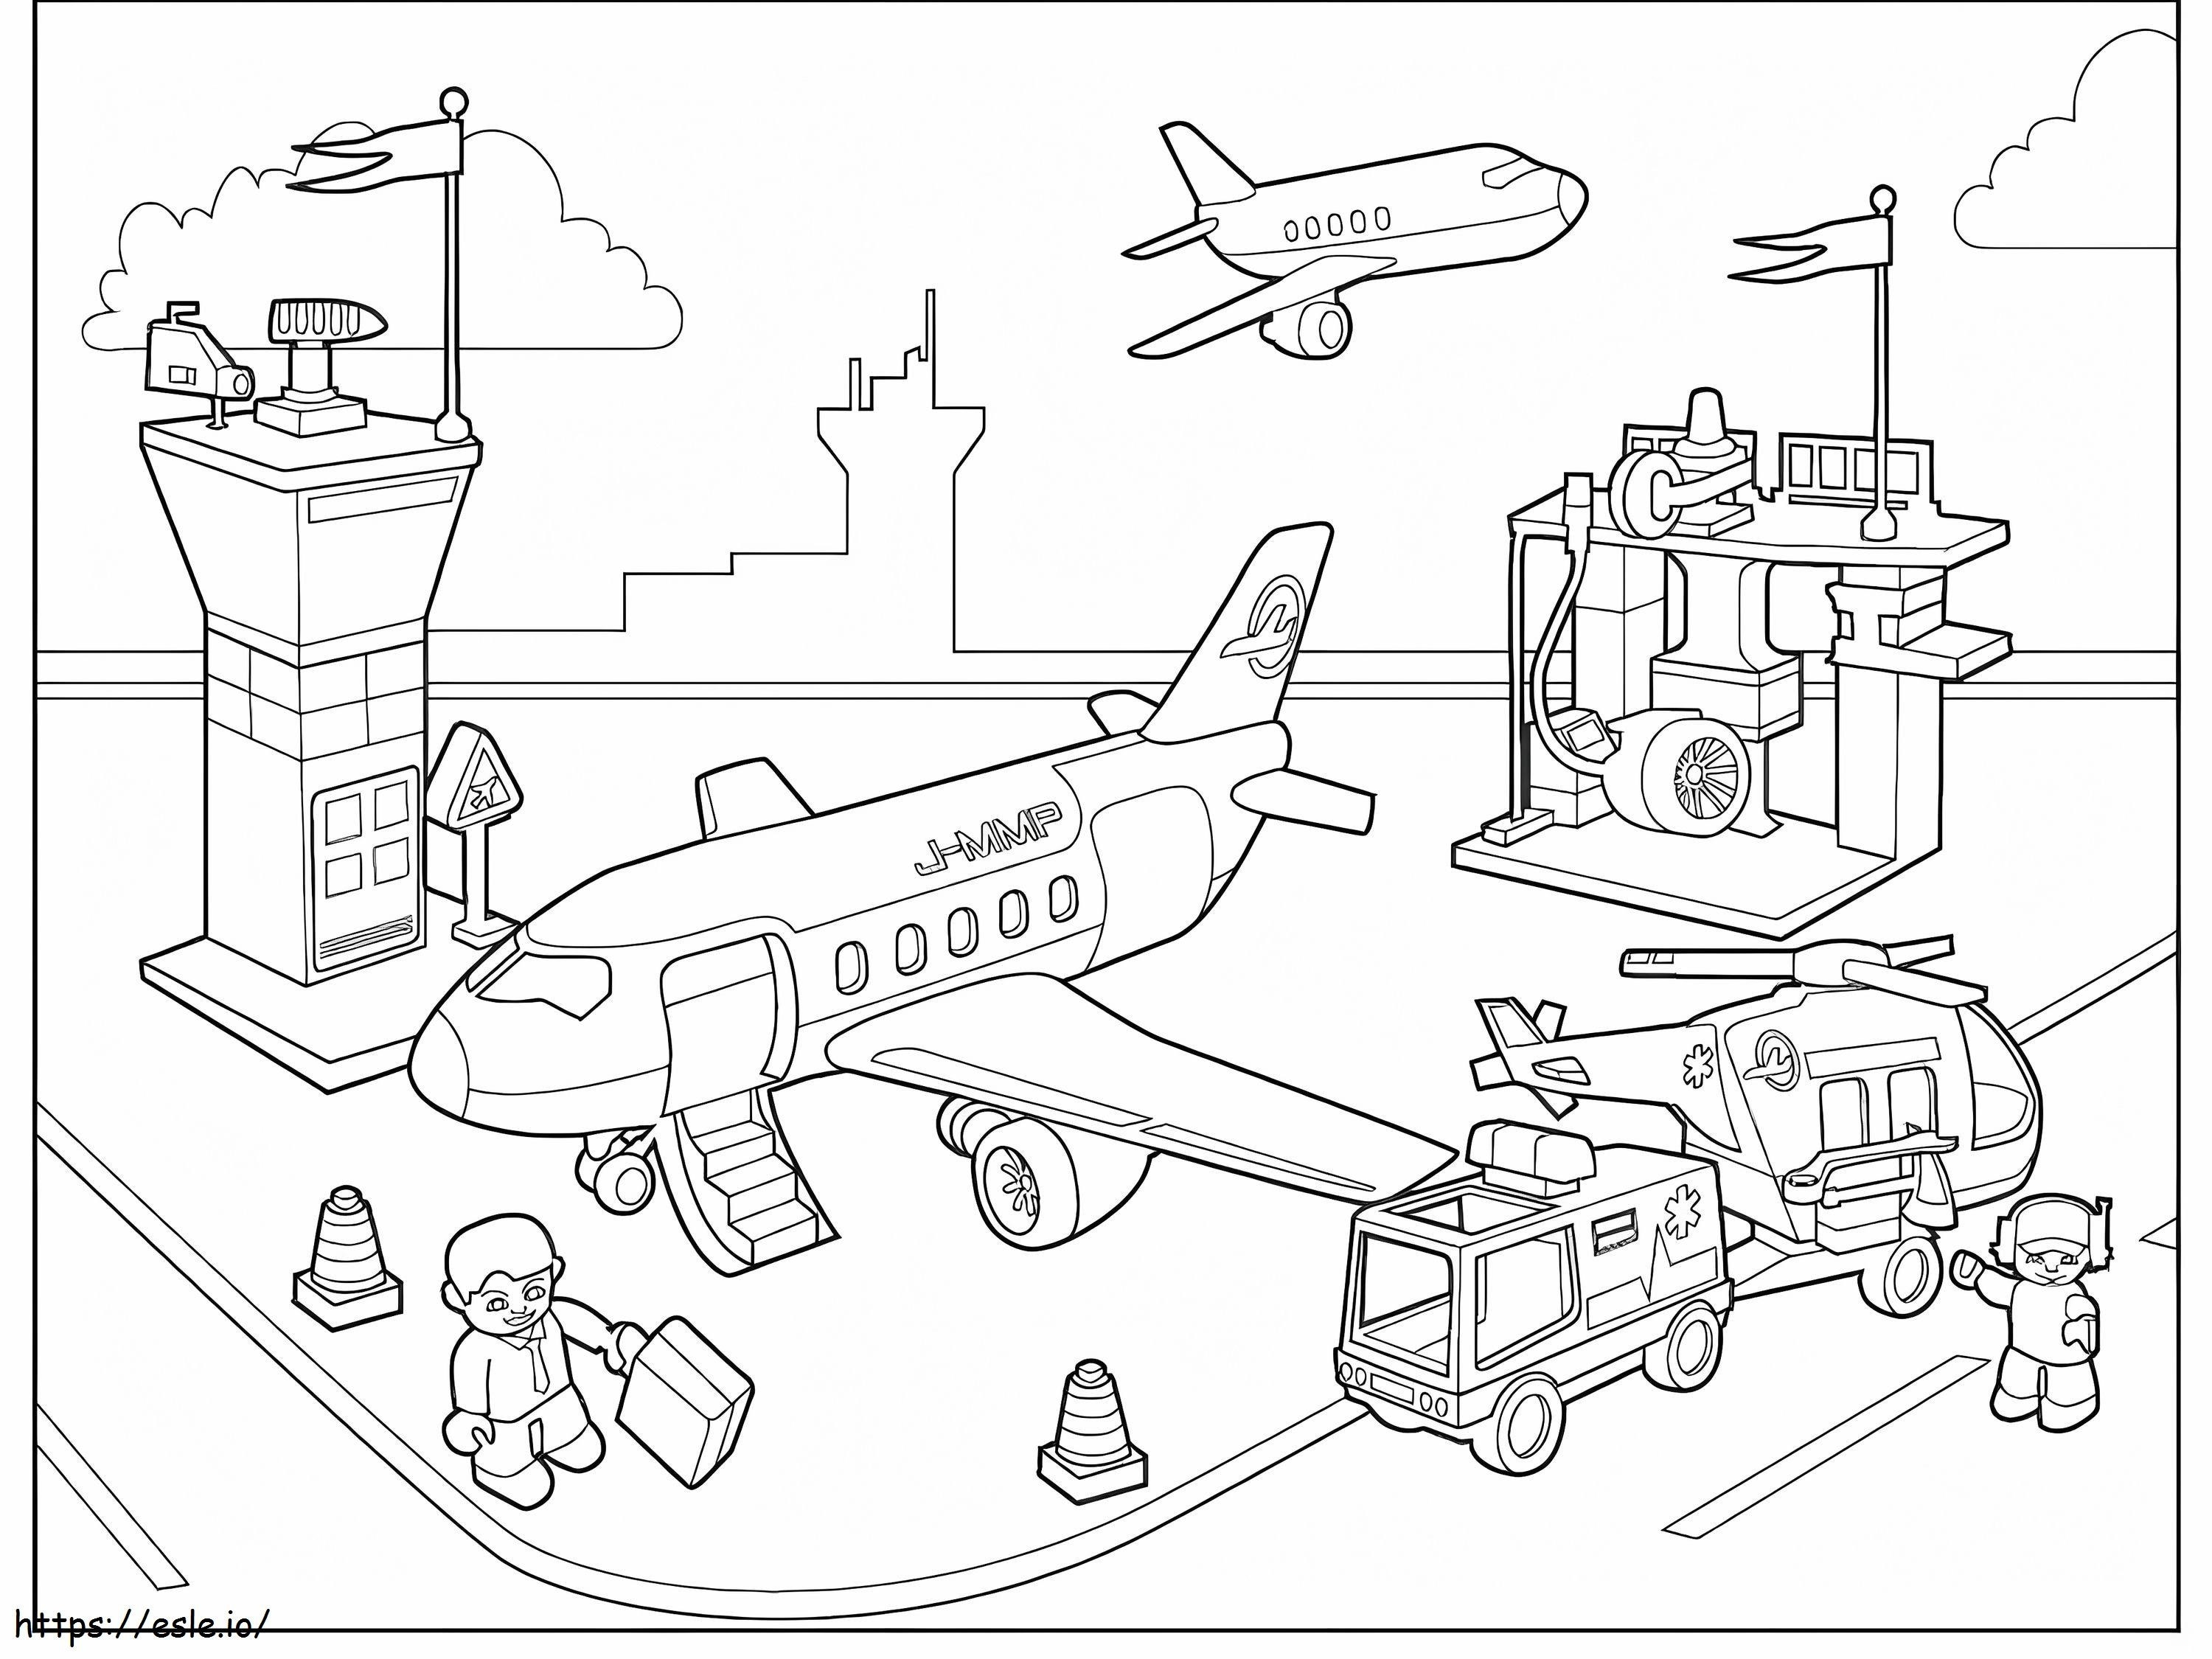 Lego Airport coloring page